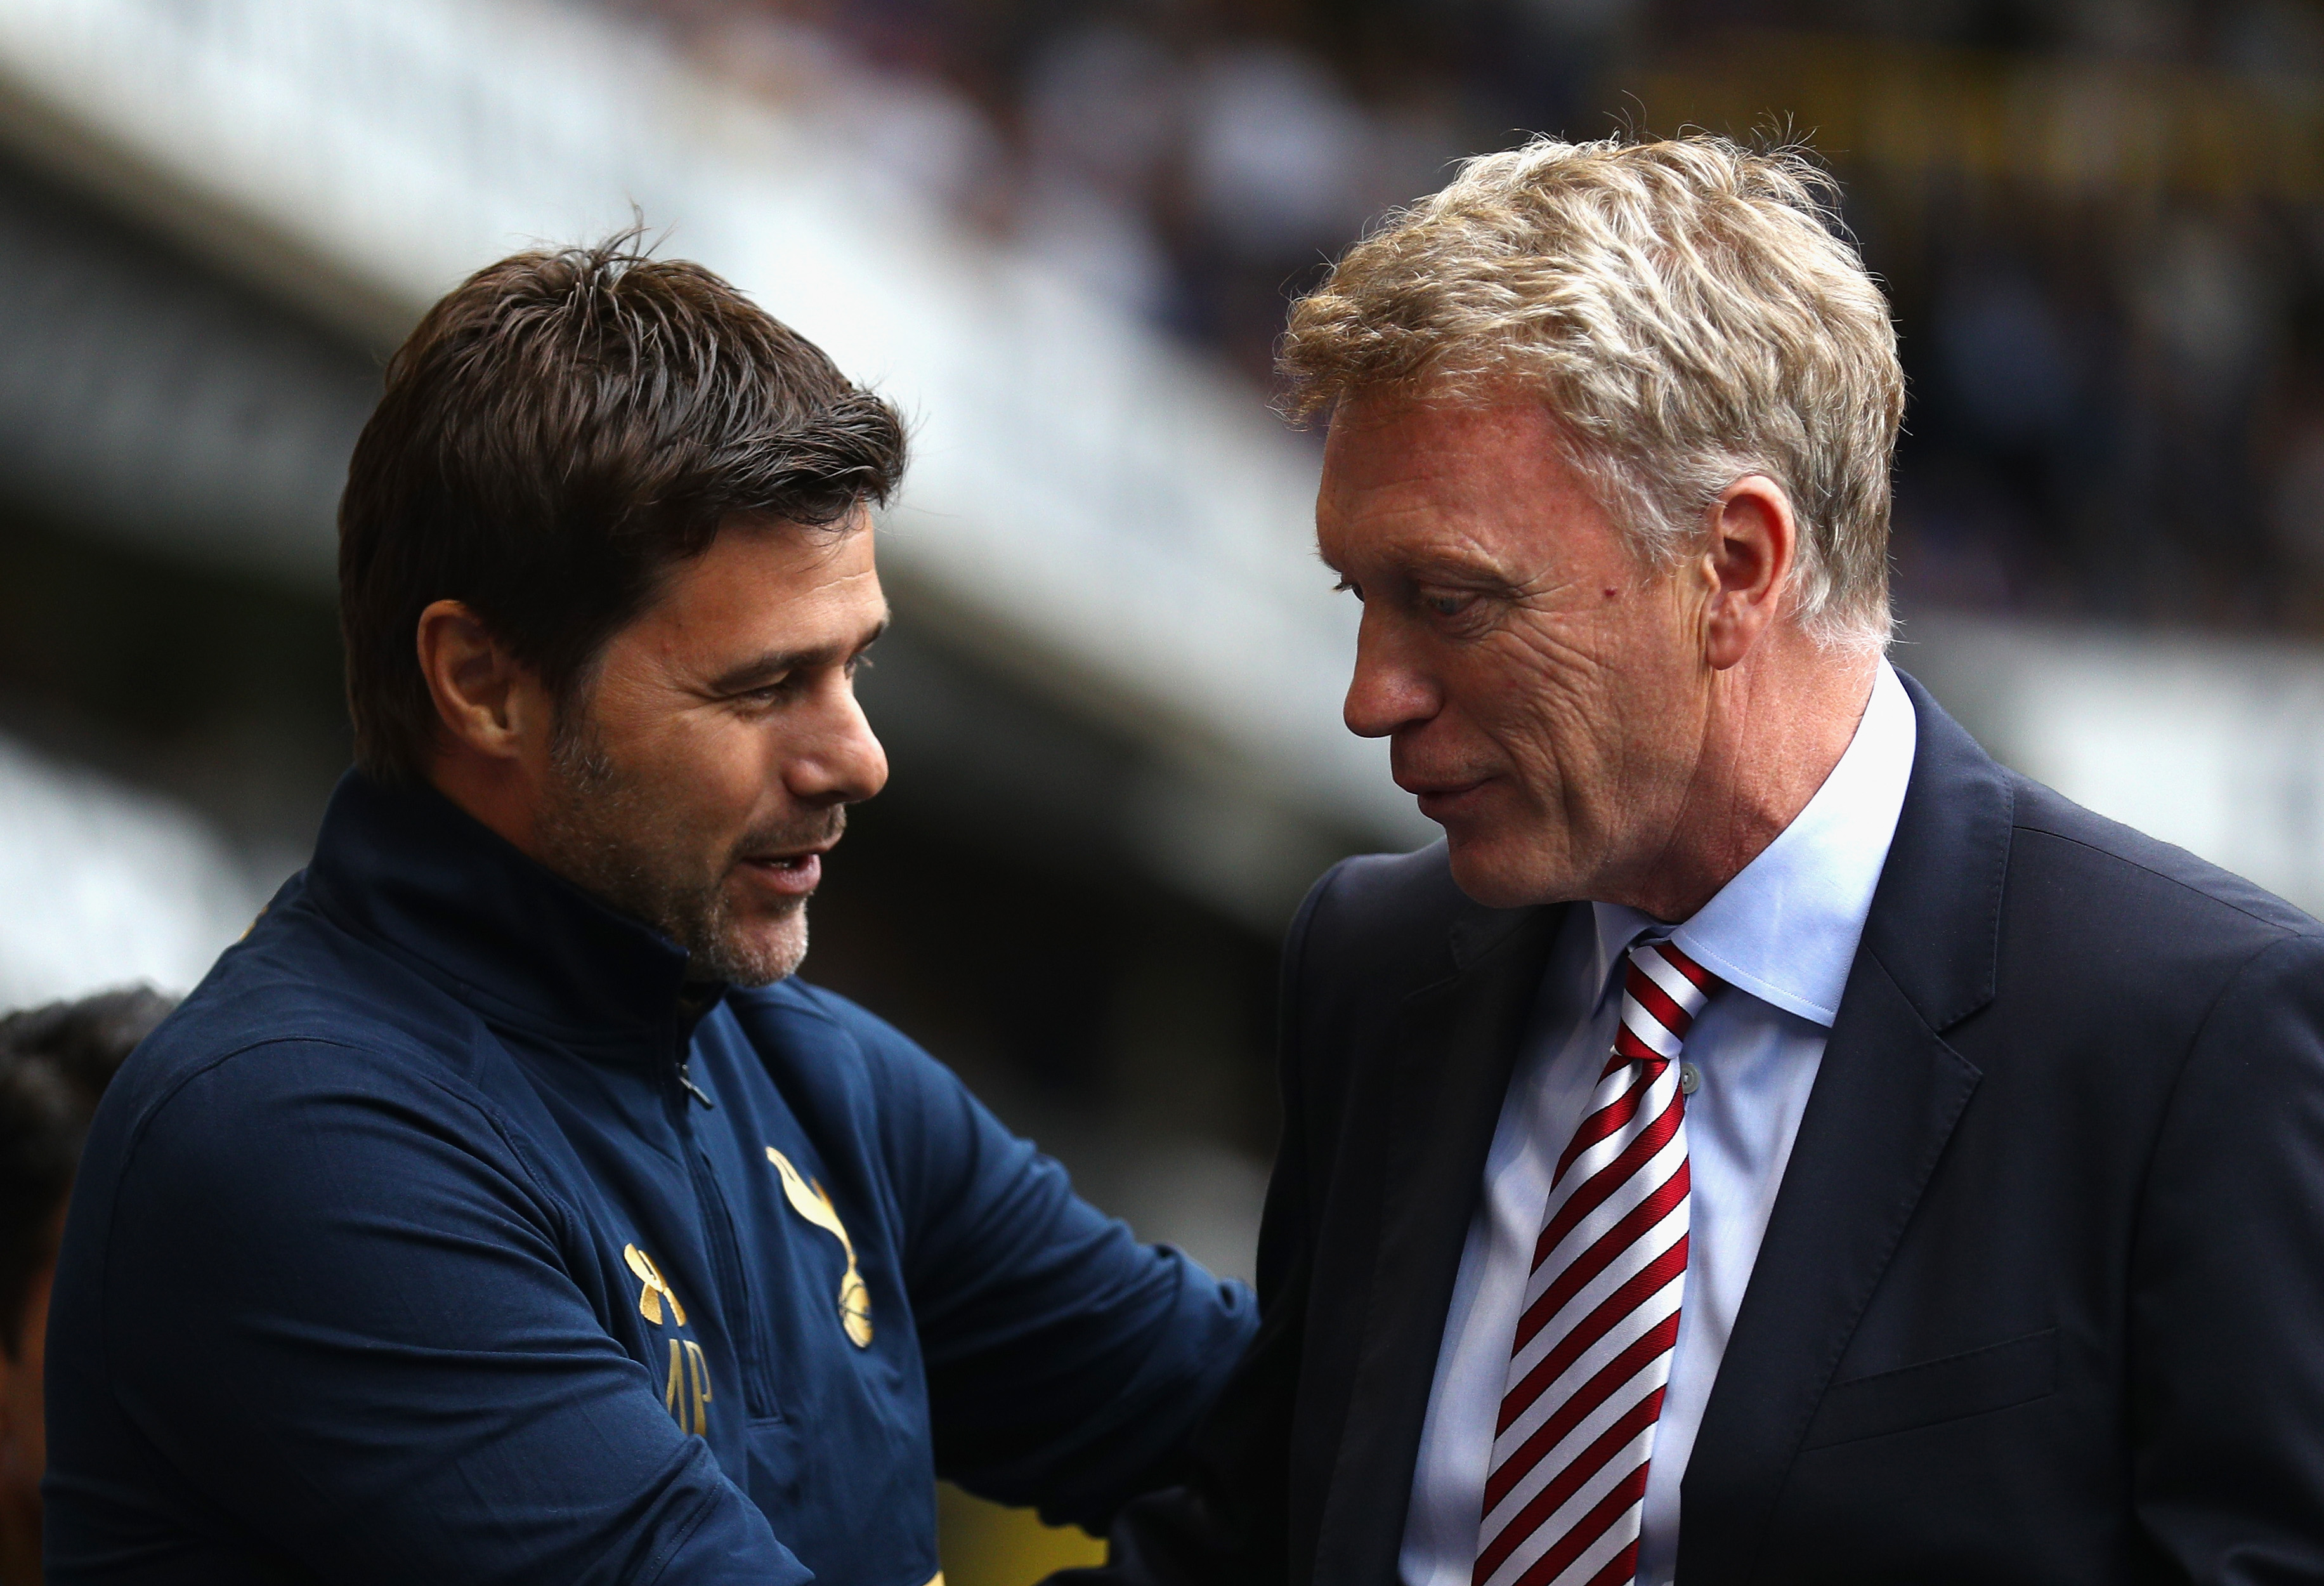 LONDON, ENGLAND - SEPTEMBER 18:  Mauricio Pochettino, Manager of Tottenham Hotspur (L) and David Moyes, Manager of Sunderland (R) embrace before kick off during the Premier League match between Tottenham Hotspur and Sunderland at White Hart Lane on September 18, 2016 in London, England.  (Photo by Paul Gilham/Getty Images)